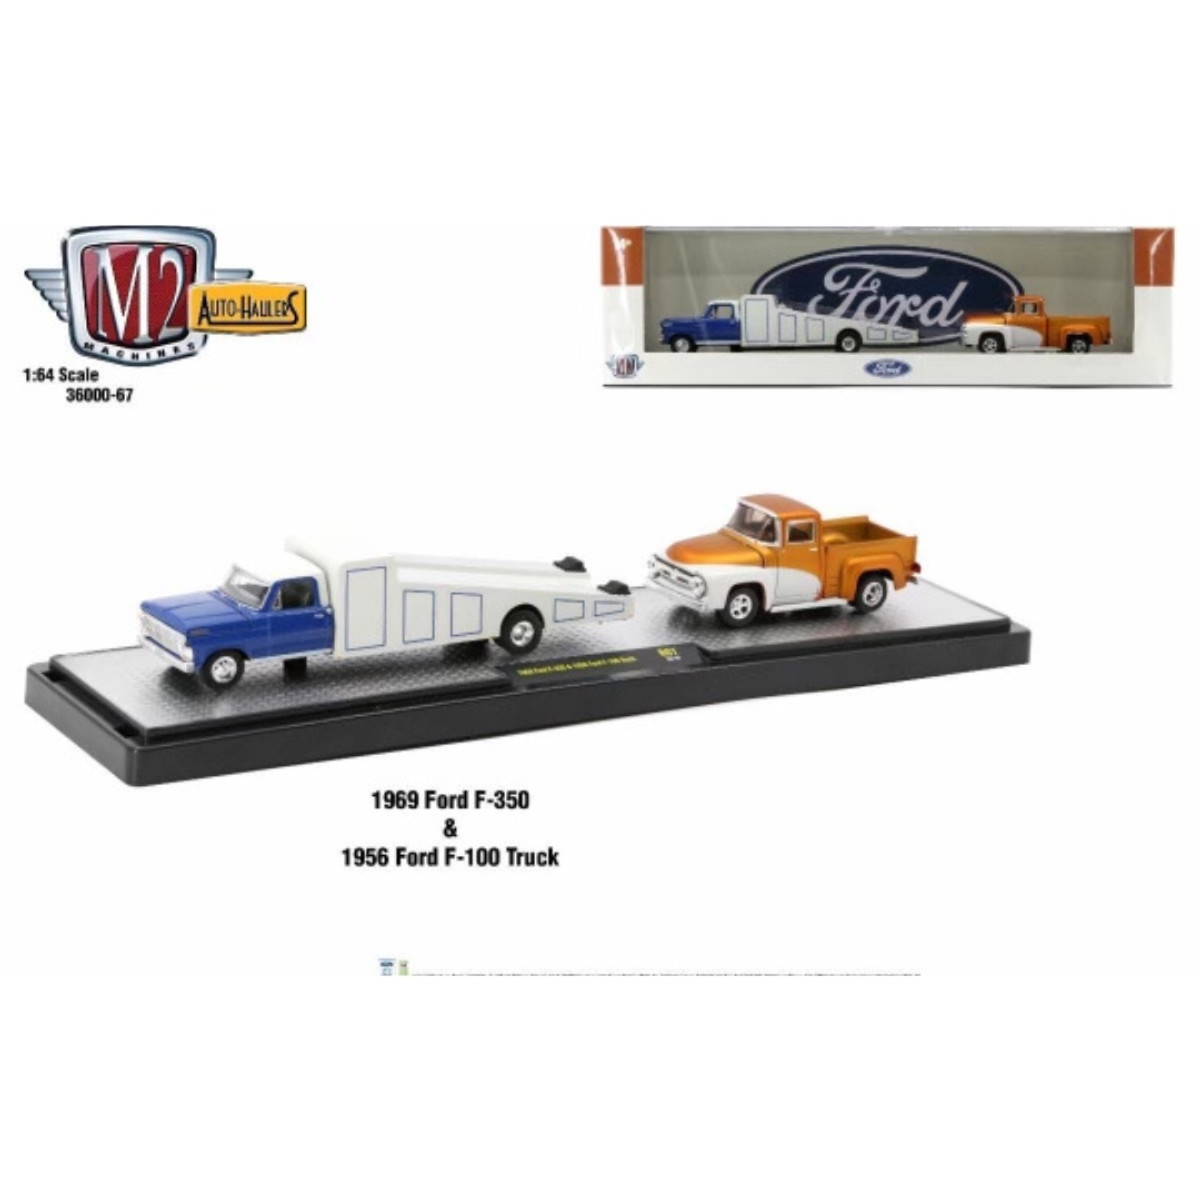 M2 Machines Auto Haulers 1969 Ford F-350 & 1956 Ford F-100 Truck Release 67